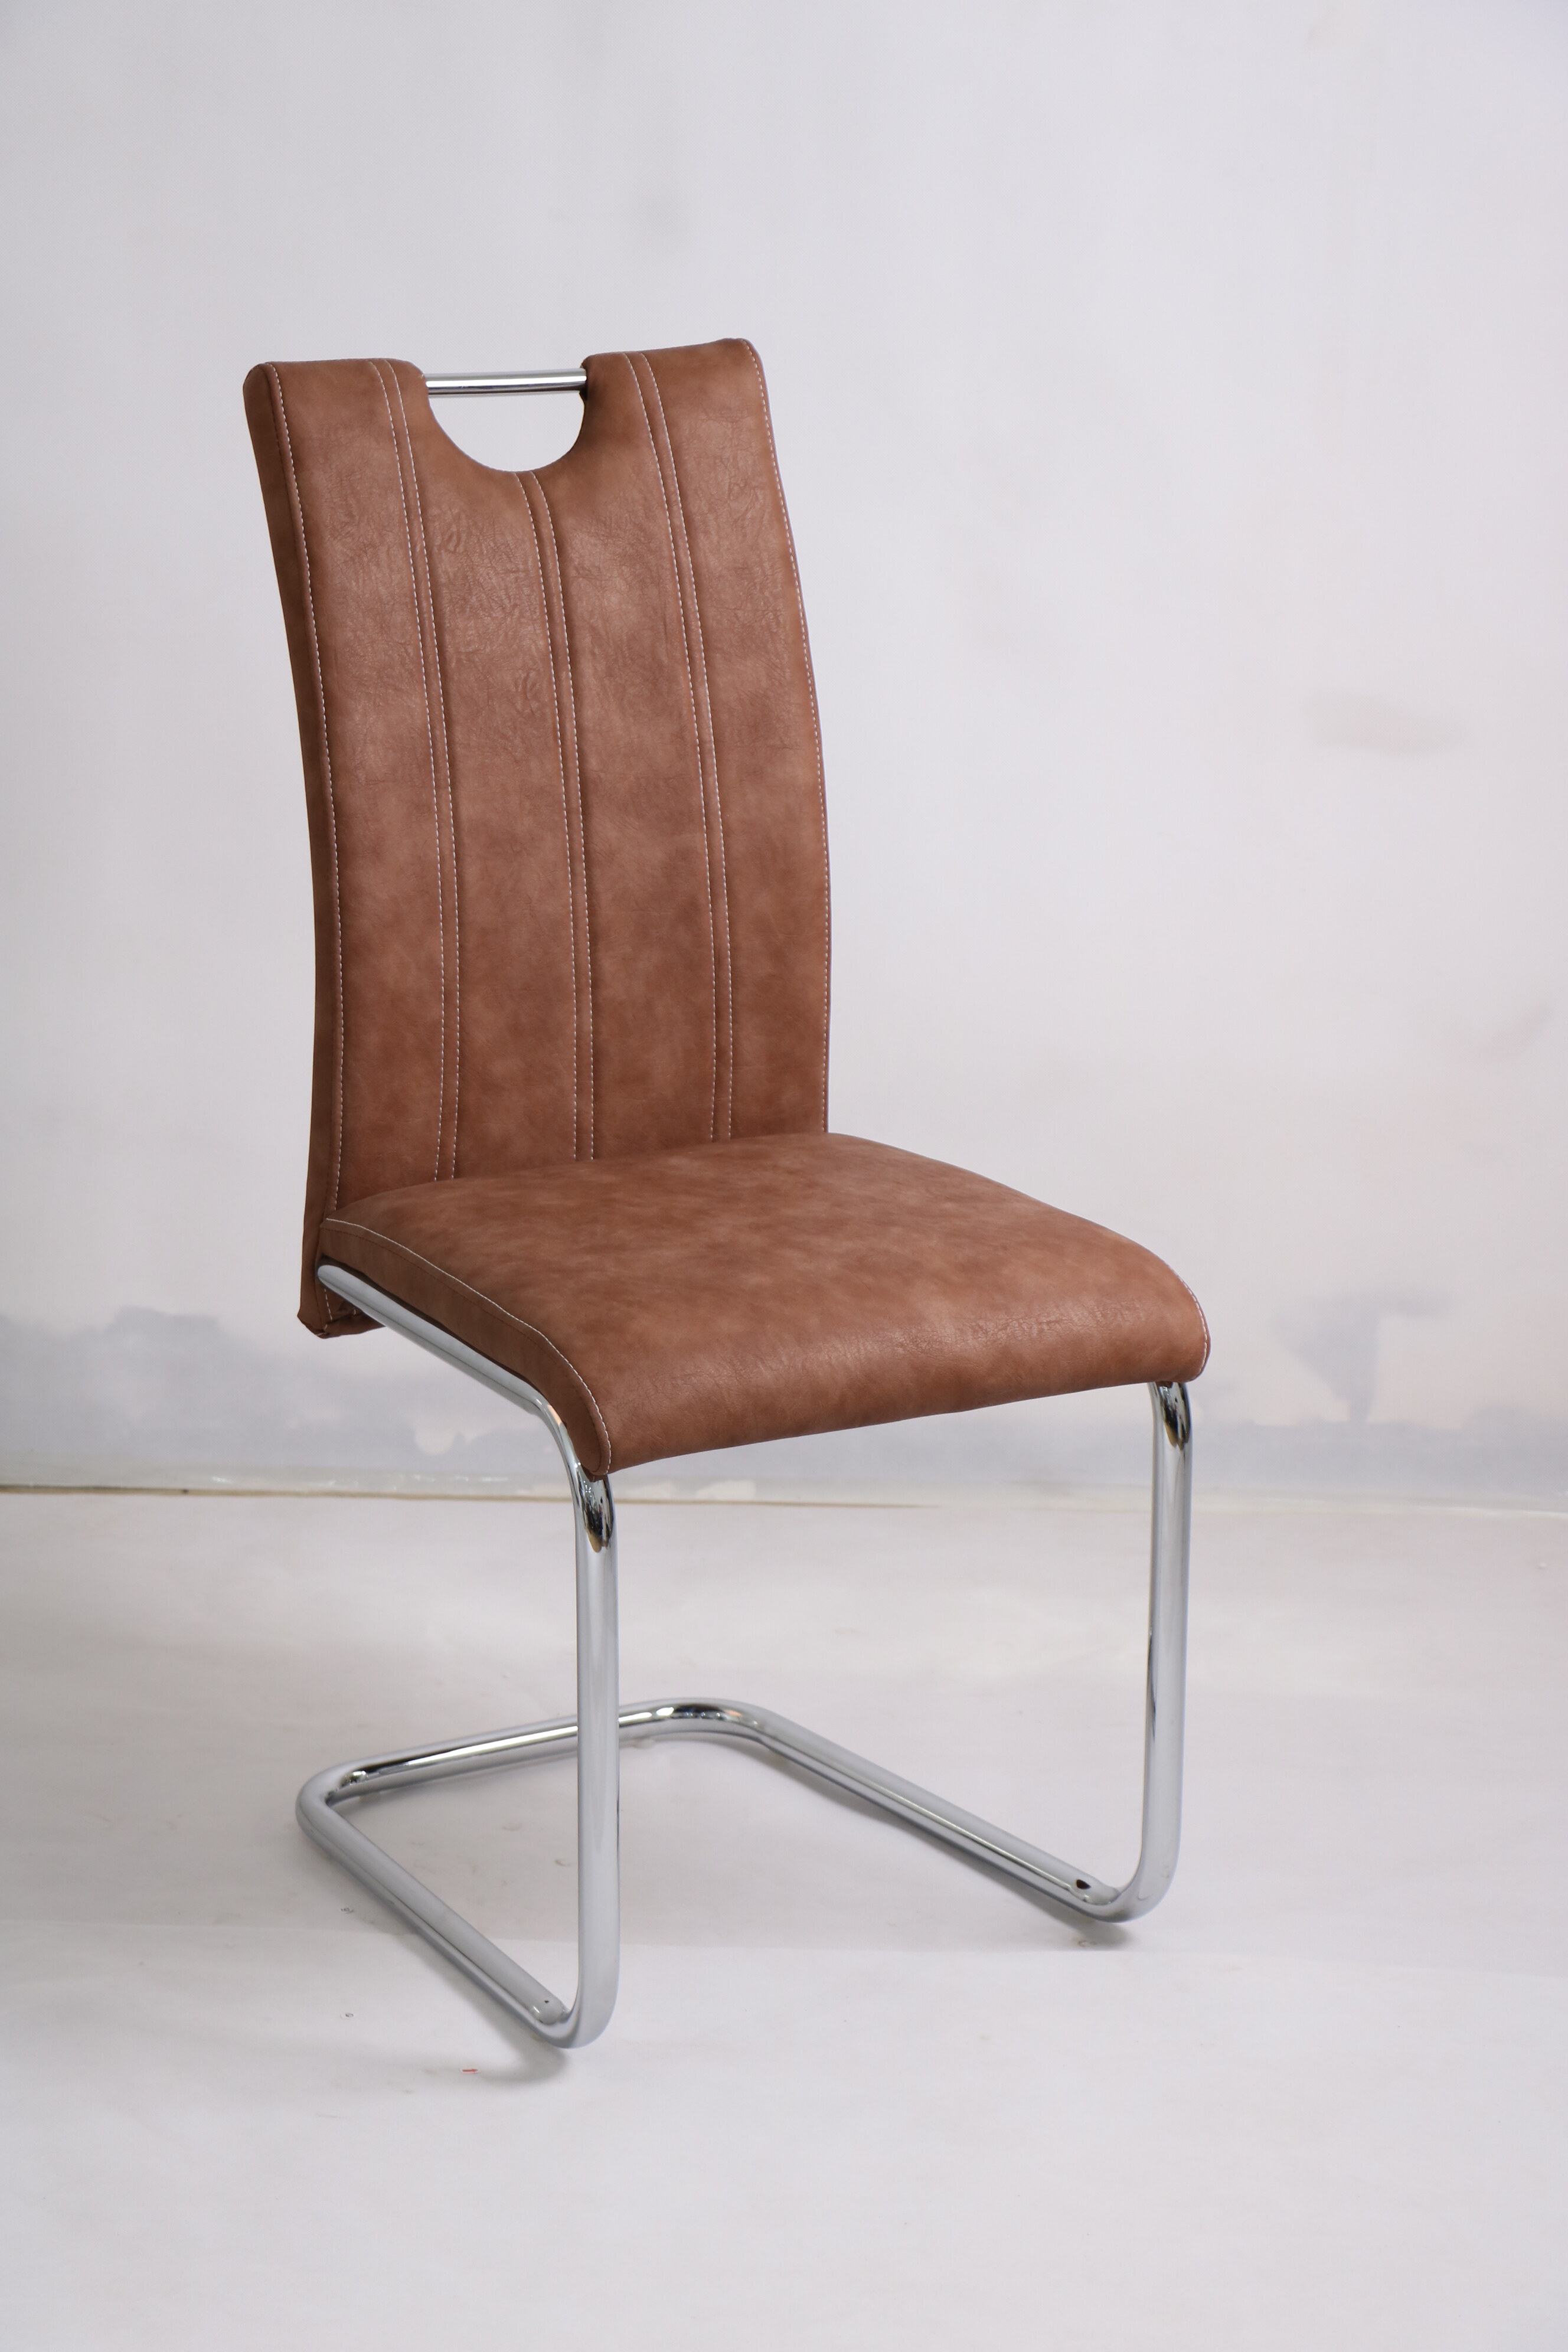 dining chair factory, dining chair exporter